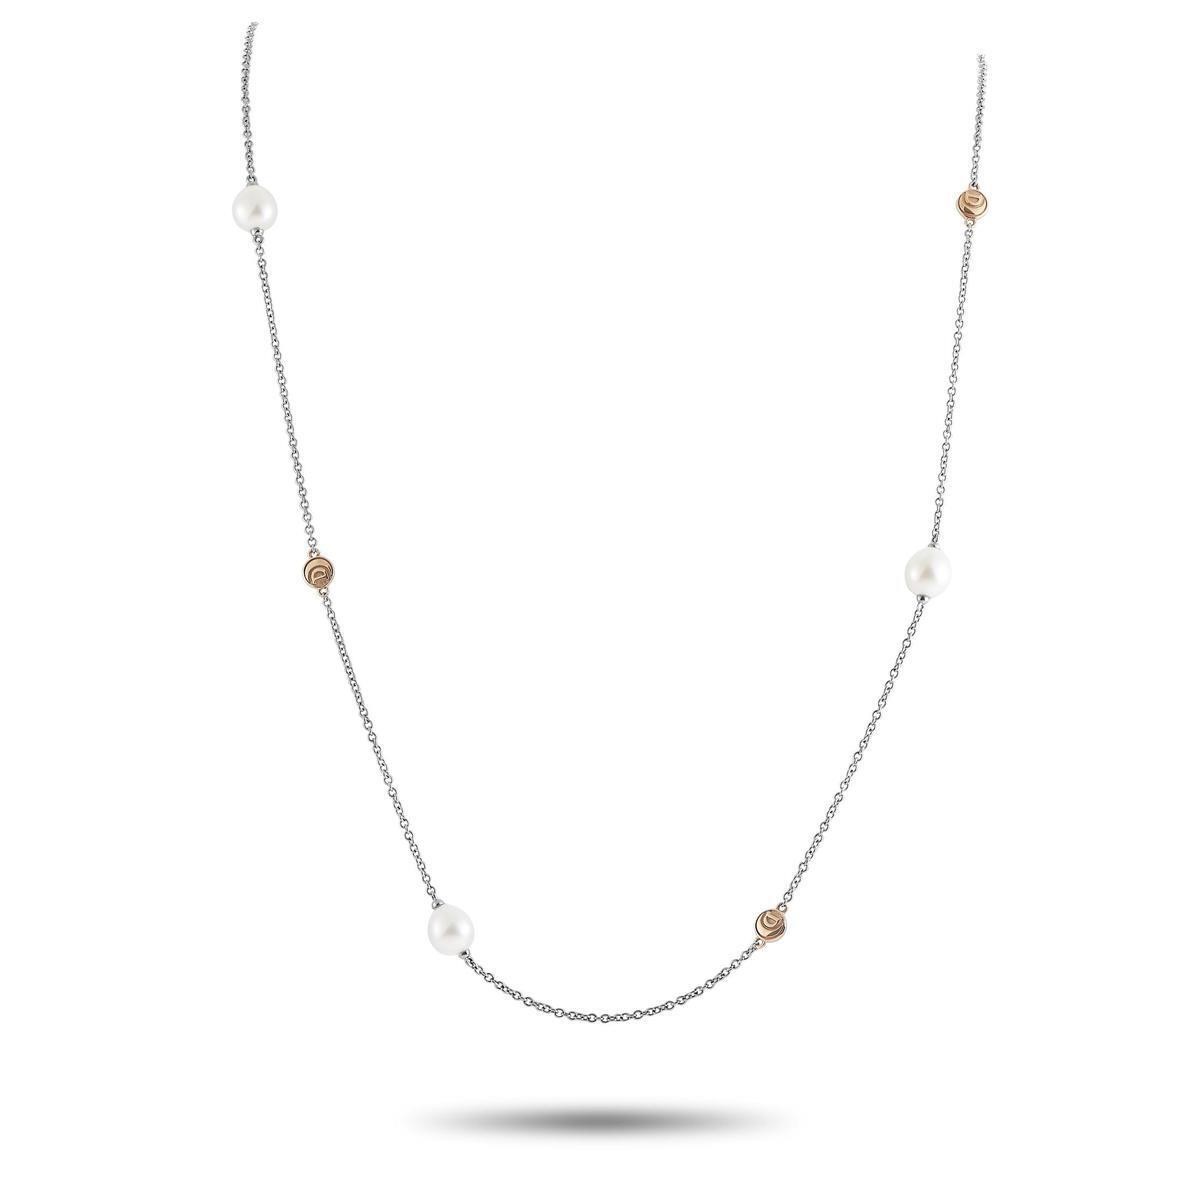 Damiani 18K White and Rose Gold Pearl Necklace